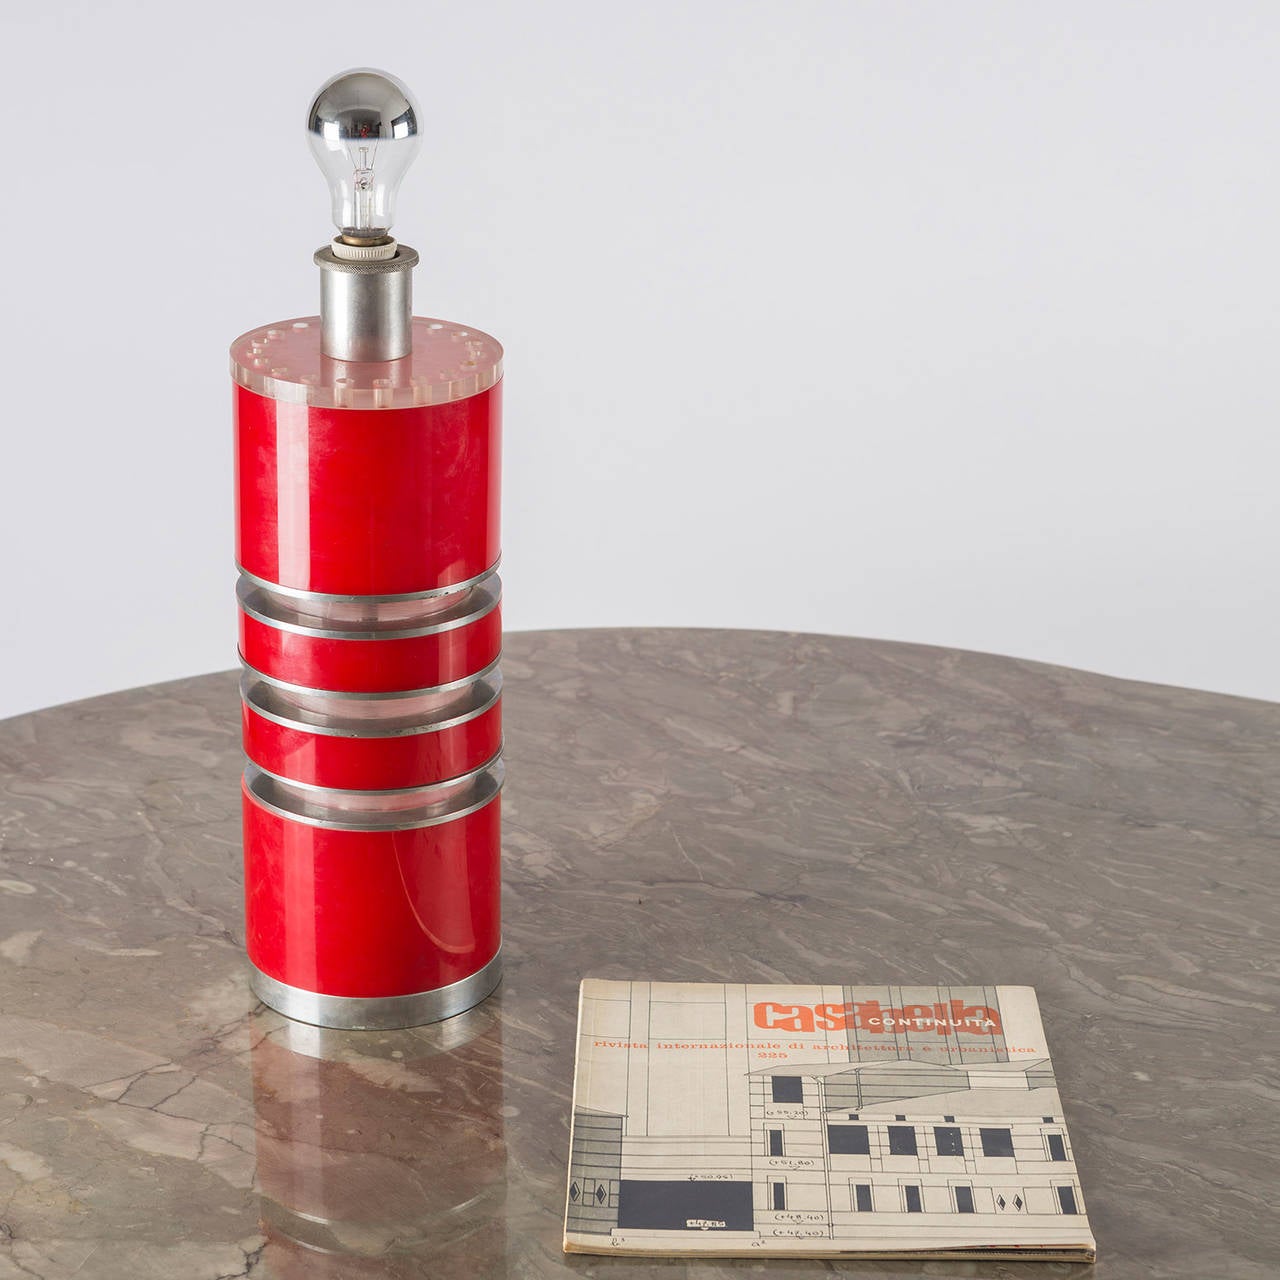 Rare Methacrylate and Aluminium Table Lamp by I. Hsalmarson for New Lamp, 1970s For Sale 1